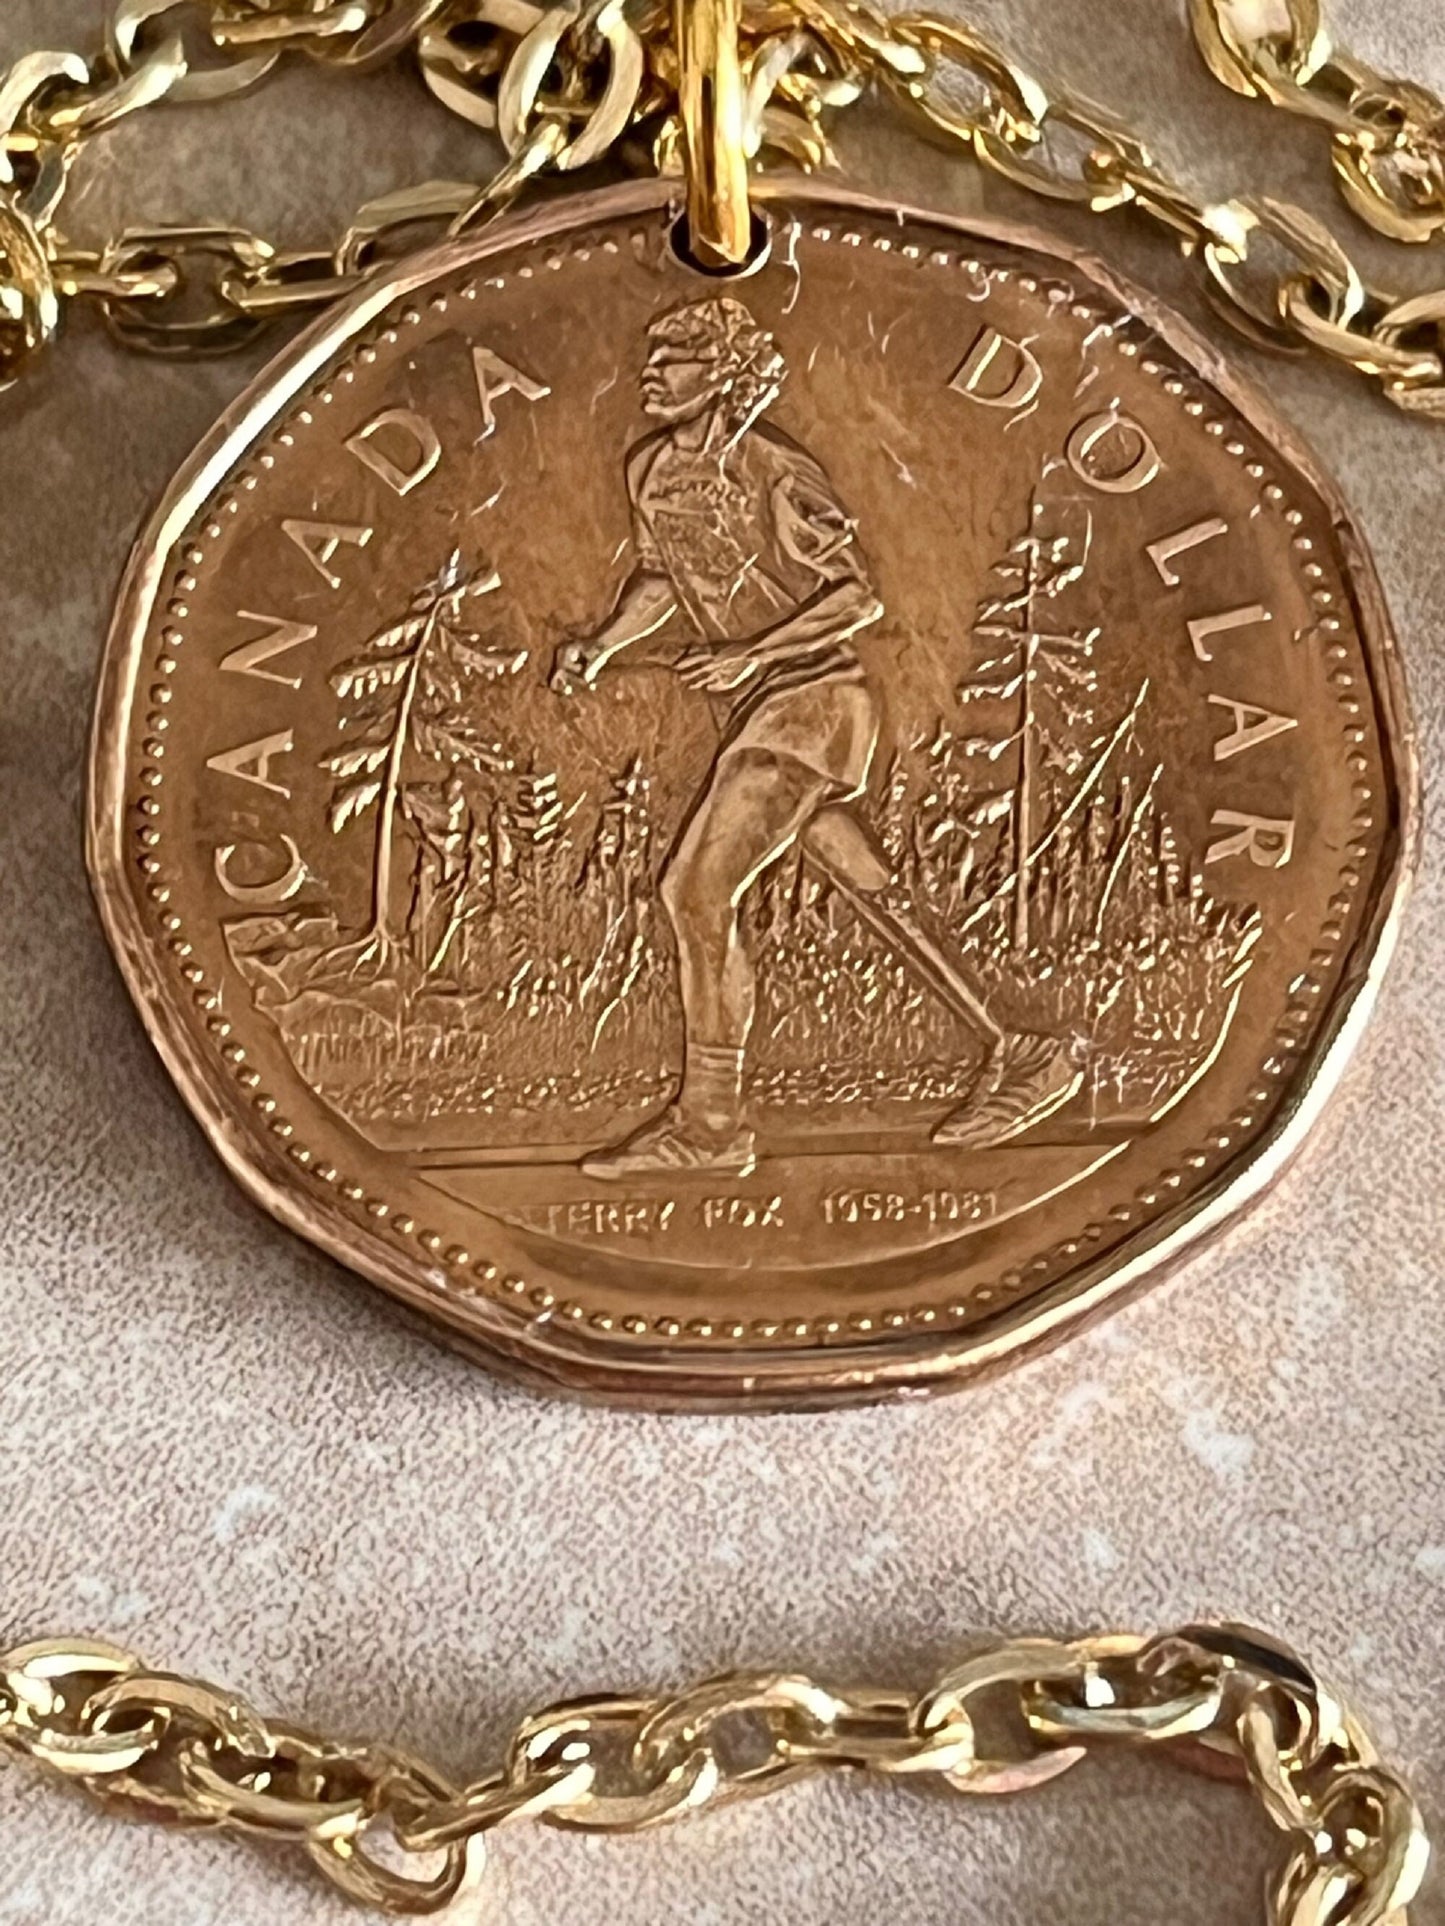 Canada Coin Necklace 2005 Terry Fox Loon Dollar Loonie Personal Vintage Handmade Jewelry Gift Friend Charm For Him Her World Coin Collector